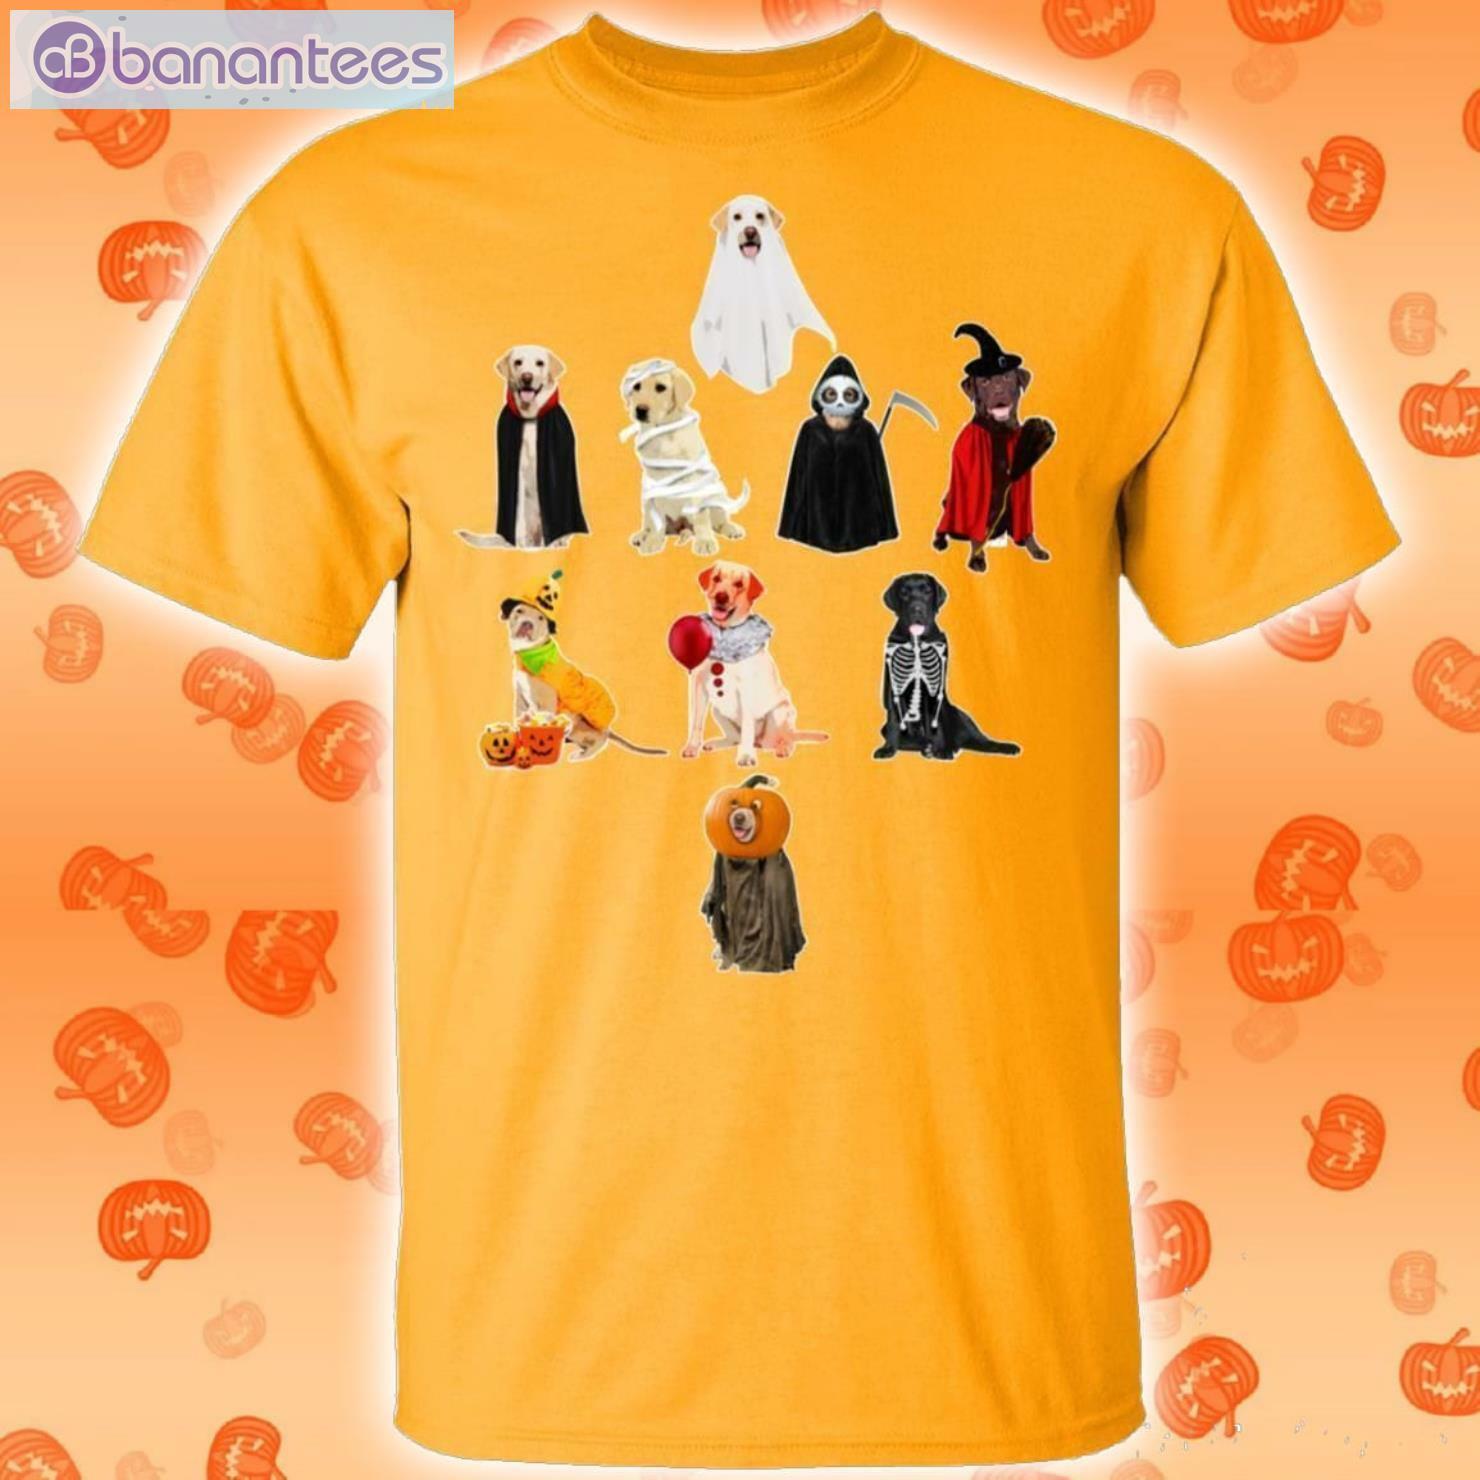 Labrador Retrievers In Halloweens Funny T-Shirt Product Photo 2 Product photo 2